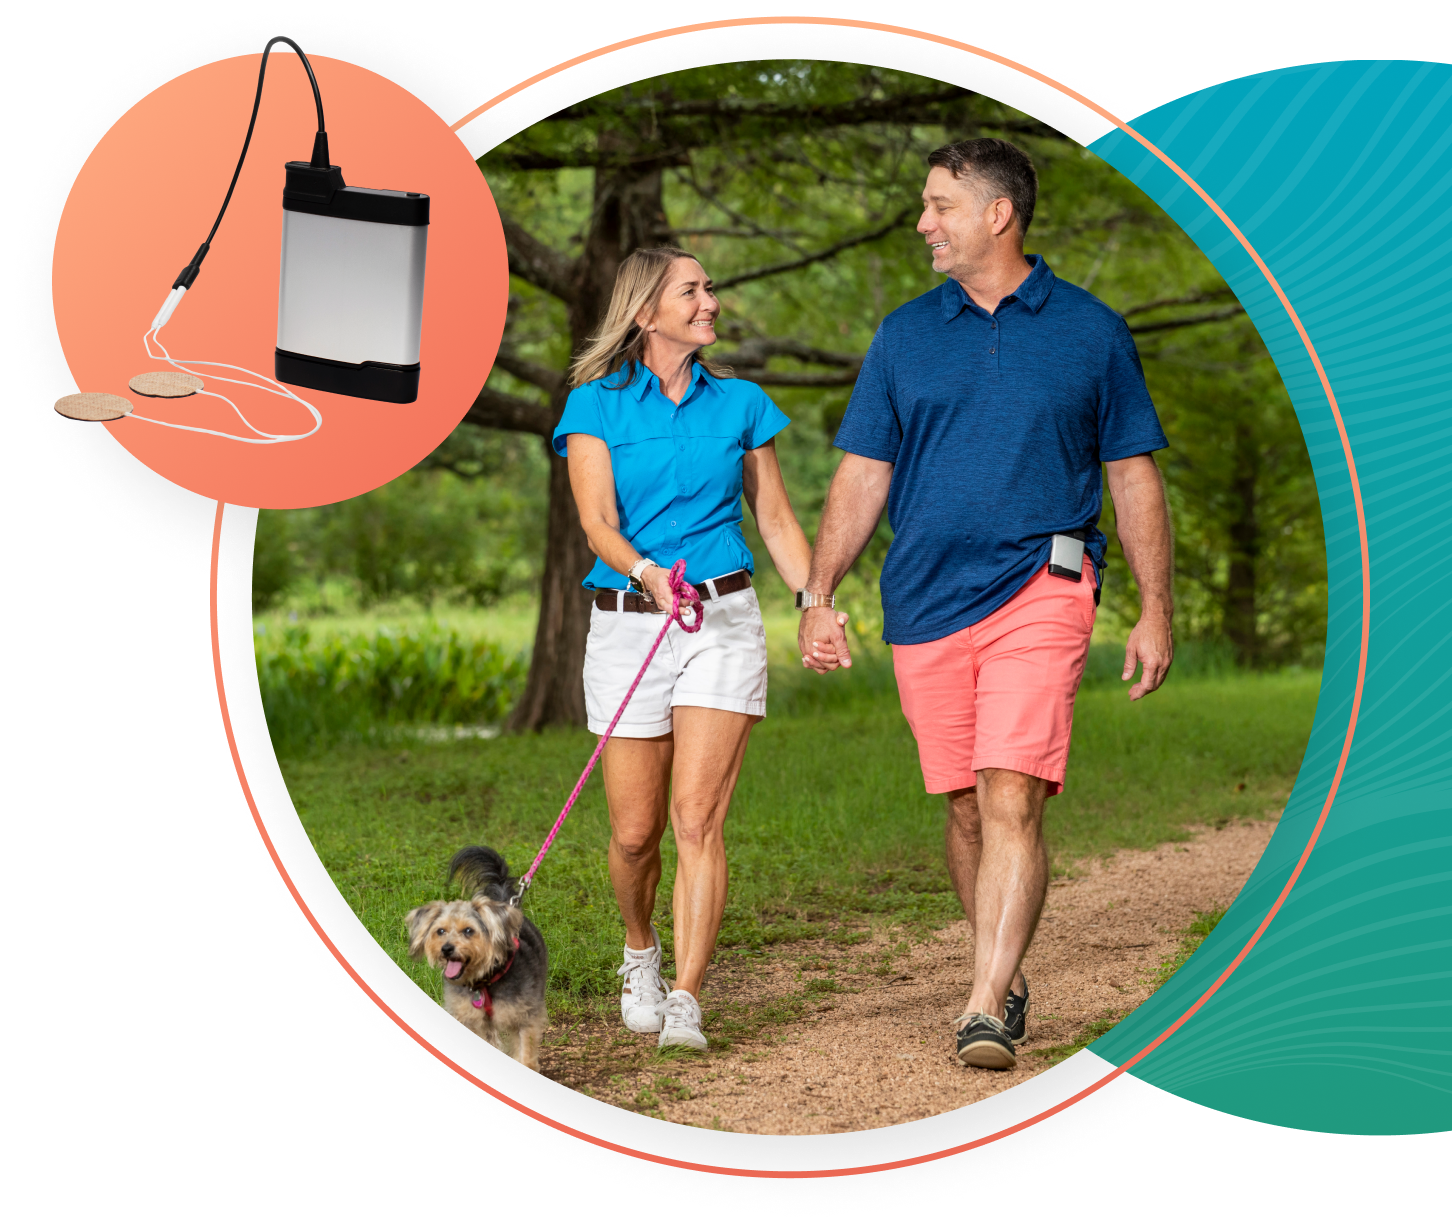 A couple holds hands while walking their dog. The man has an ActaStim-S device clipped to his shorts. There’s an inset of the full ActaStim-S device and electrodes.